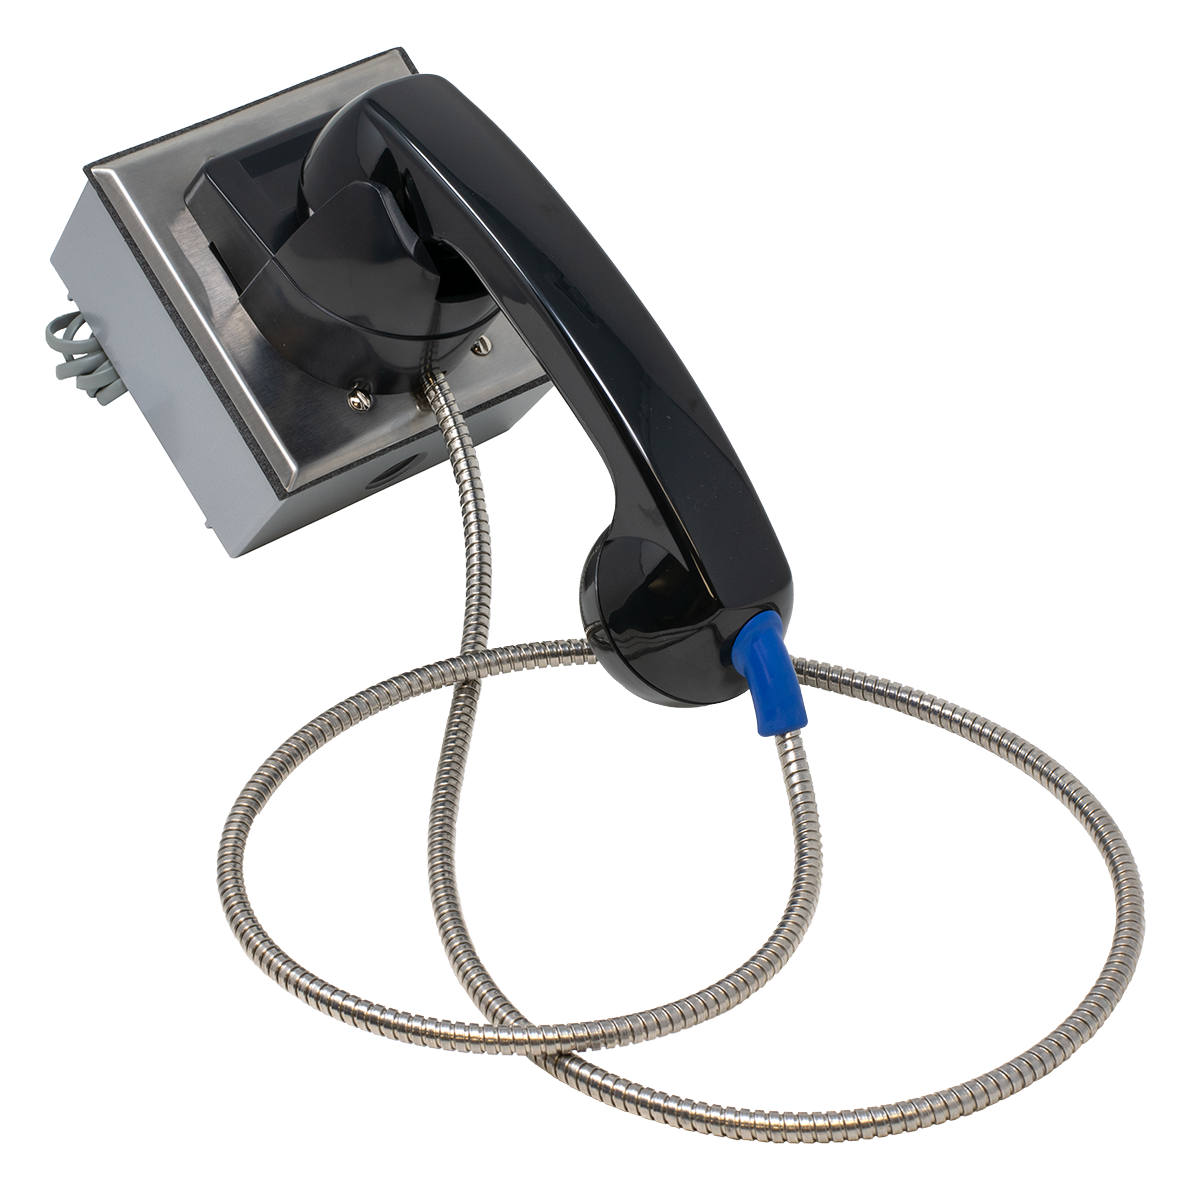 Outdoor Rated Telephone with Black Plastic Hookswitch (Side View)